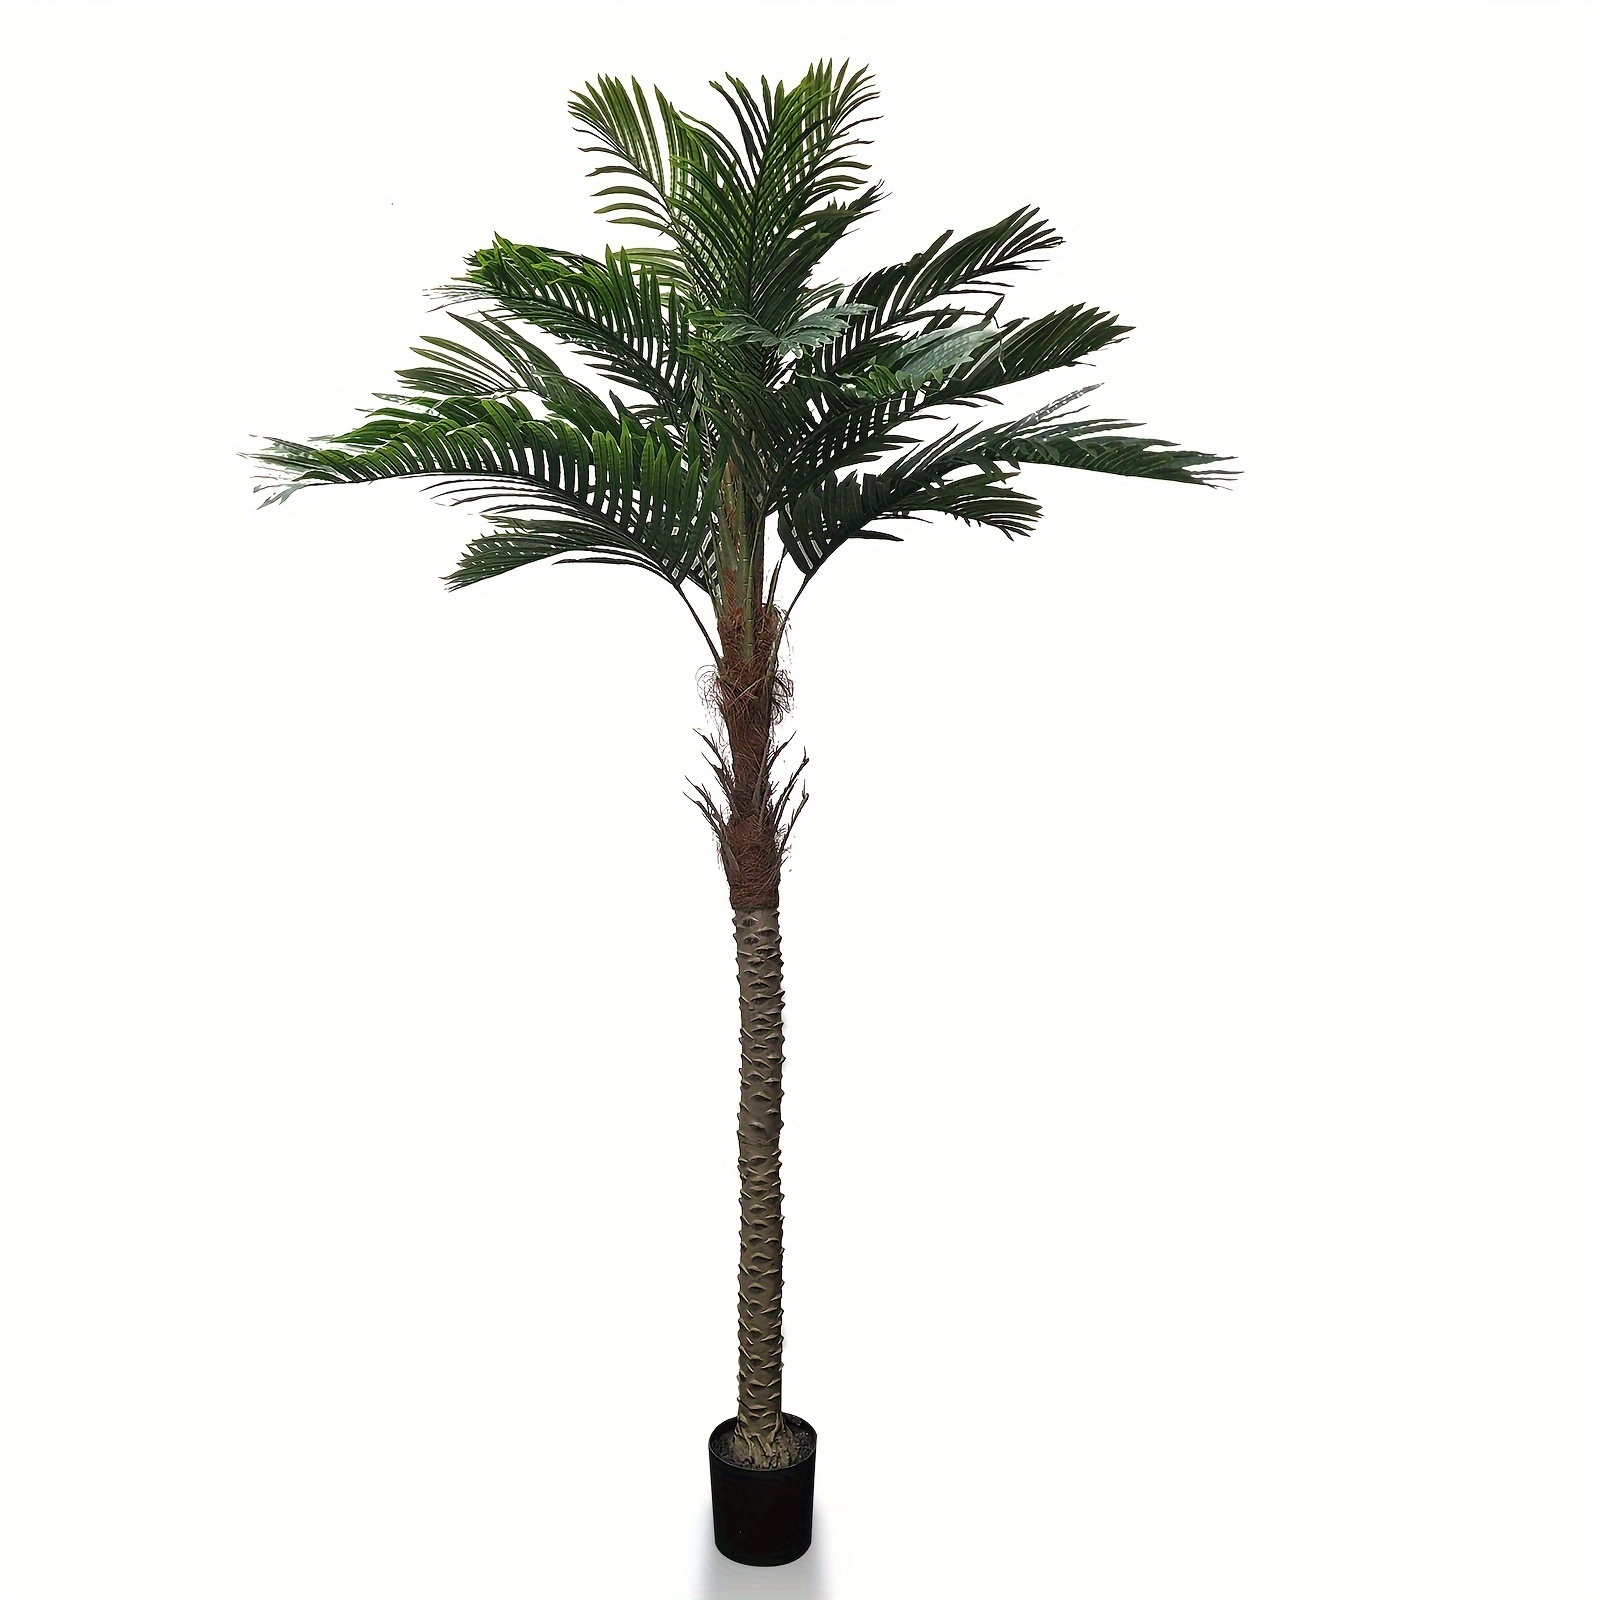 

15 Leaf Artificial Palm Tree, A Tall Outdoor Fake Tree, Used For Decorating Courtyards, Swimming Pools, Home Offices, And Enhancing Uv Protection (1 Pack)